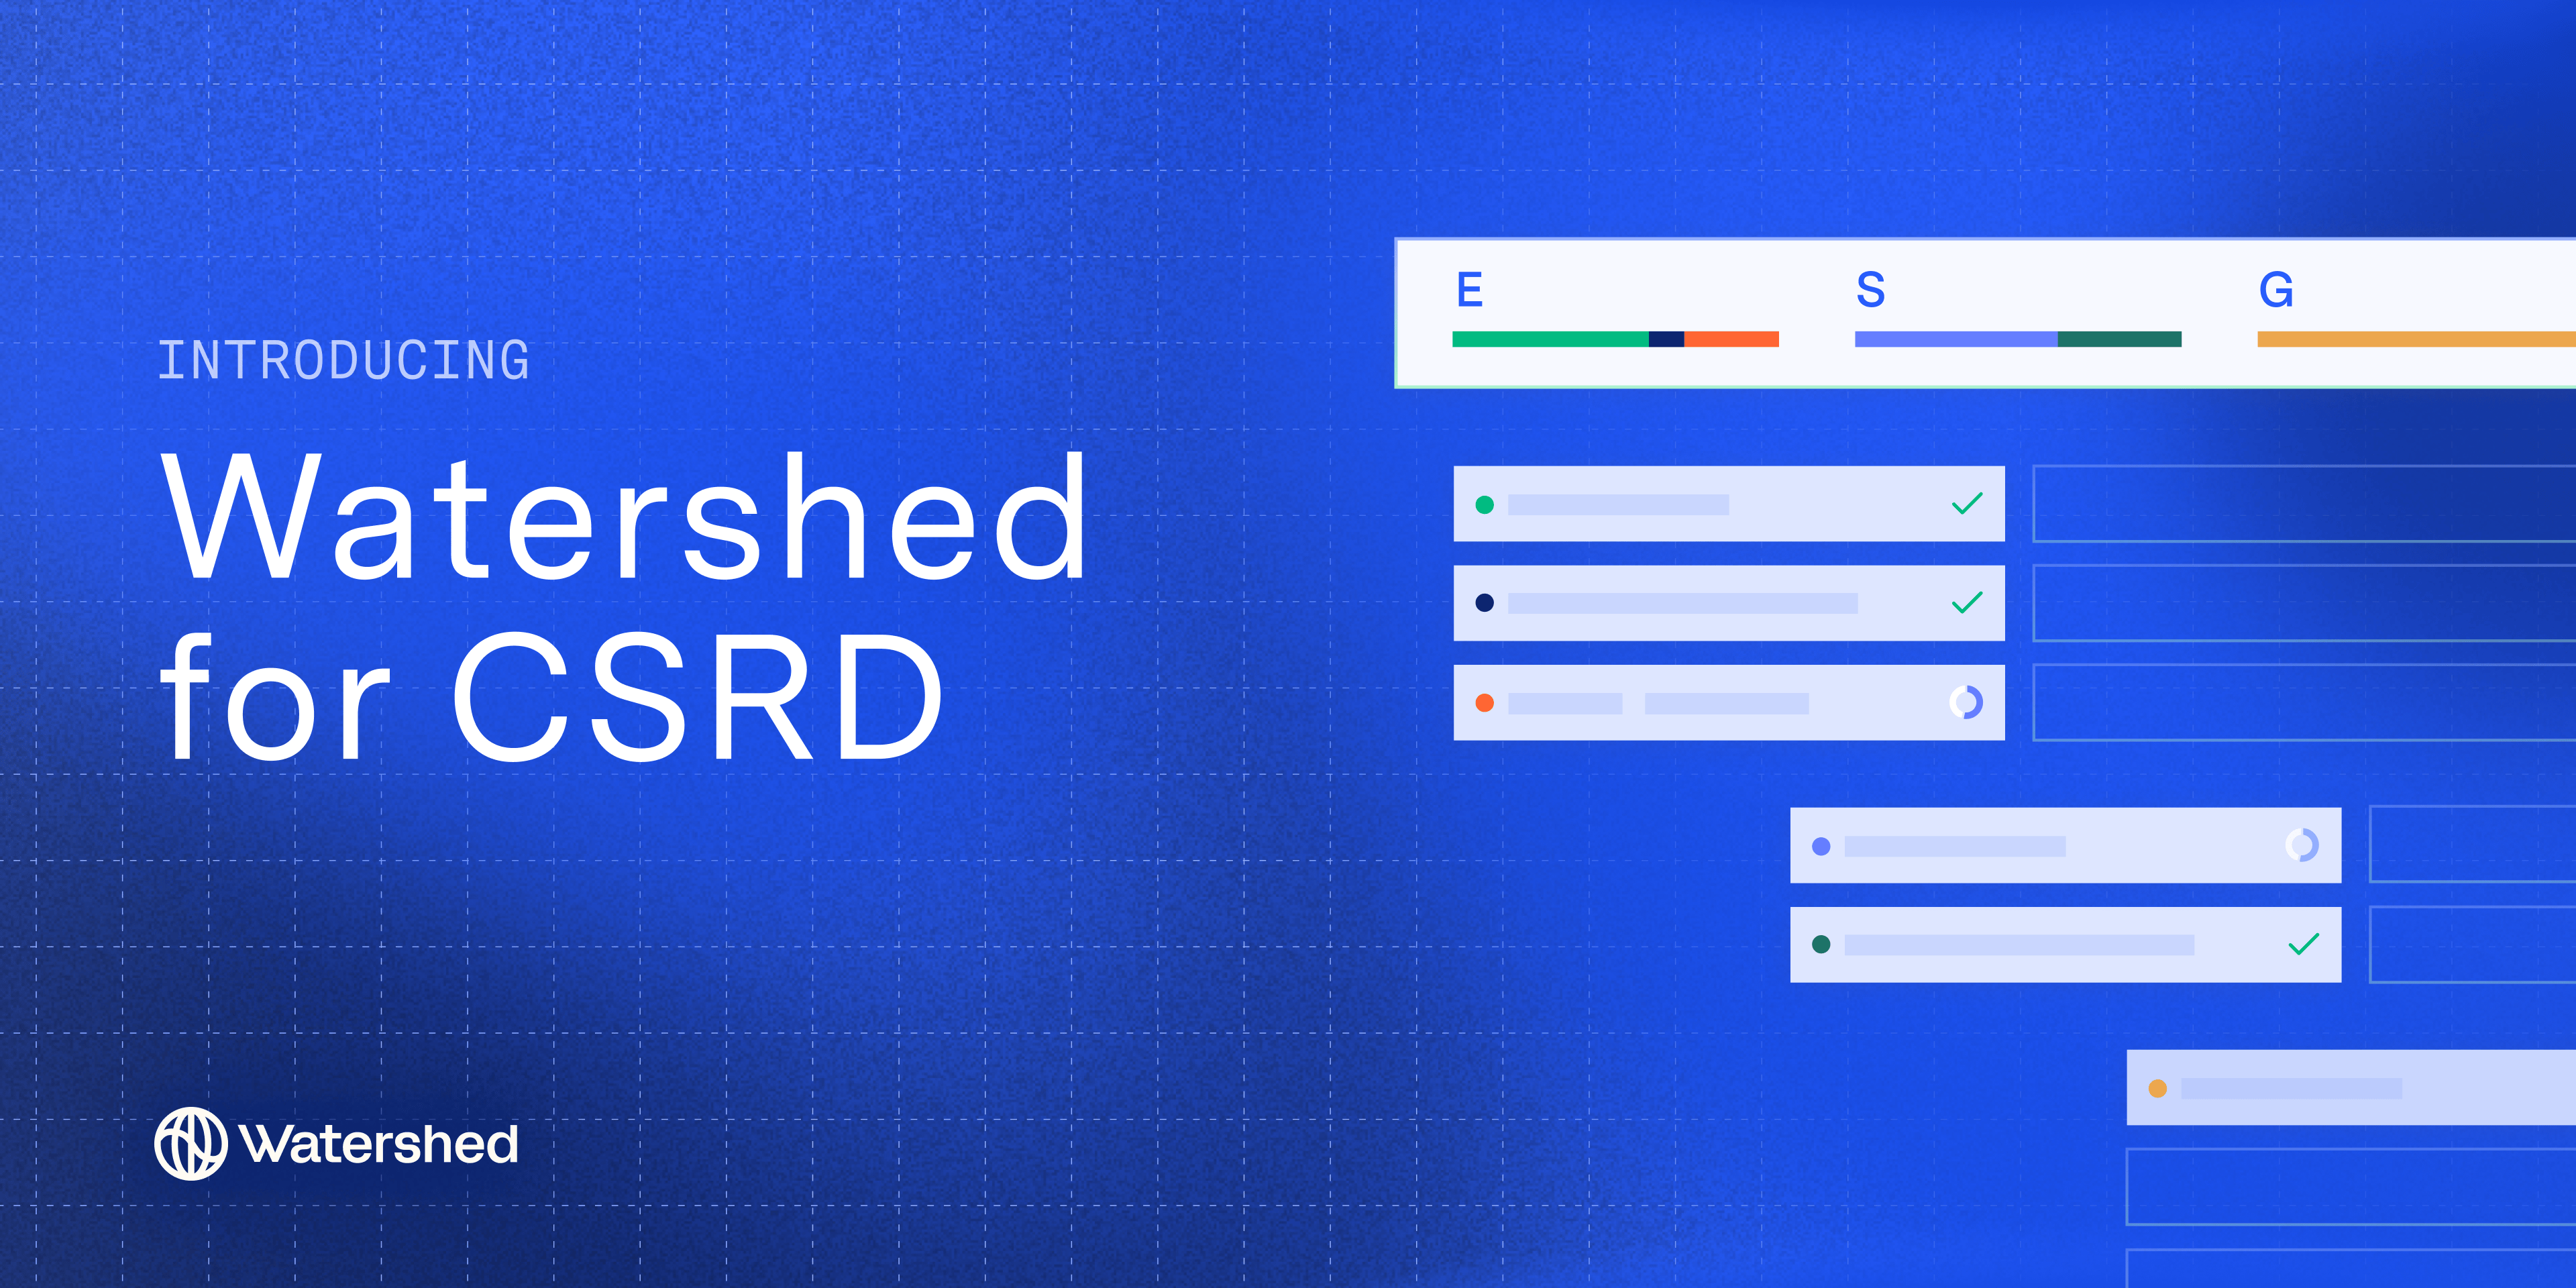 Introducing Watershed for CSRD